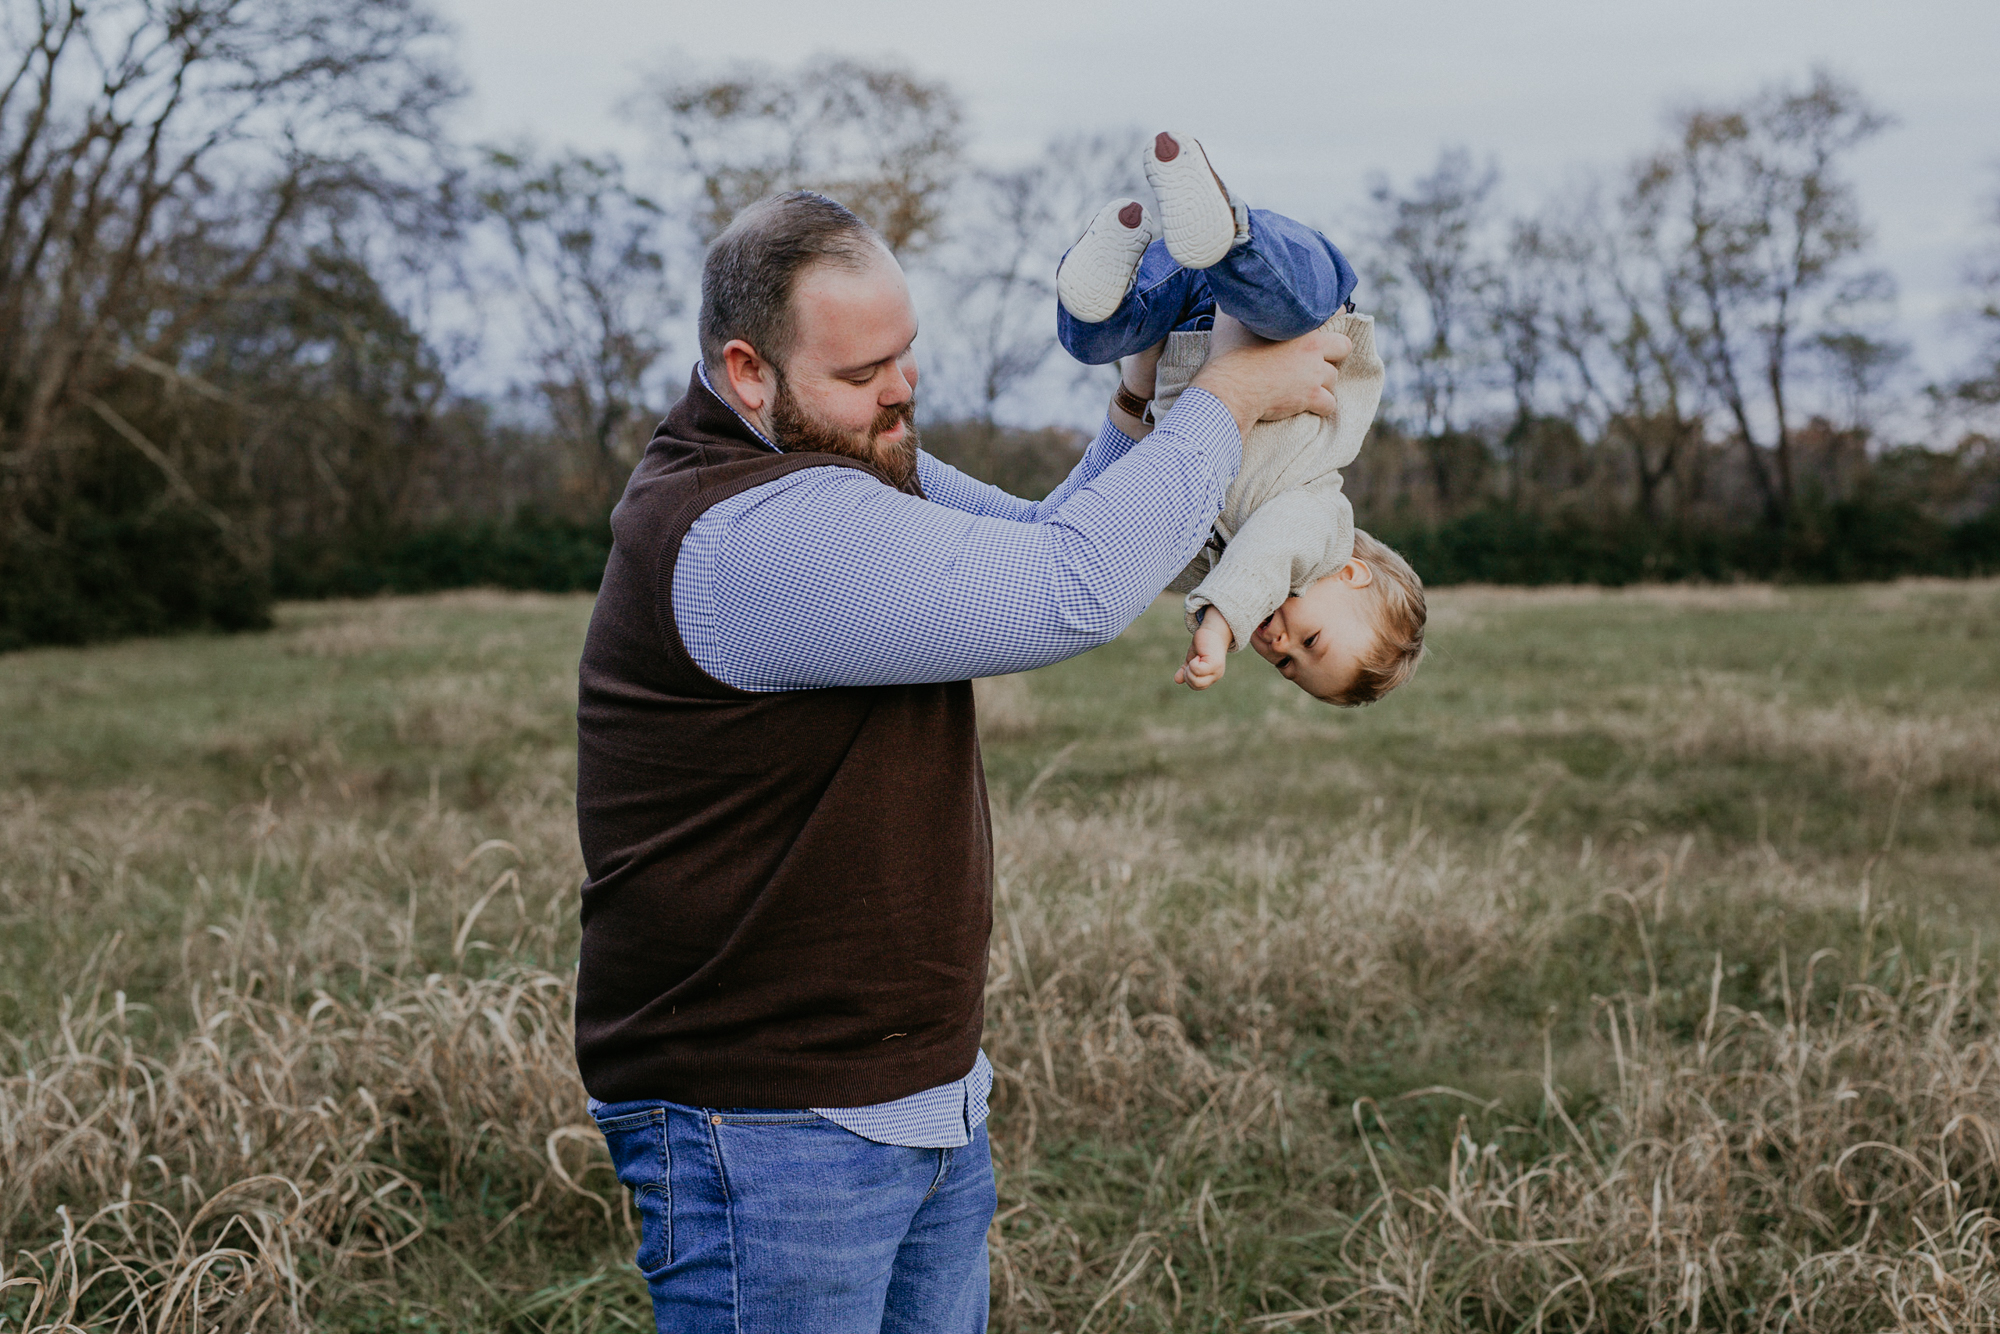 Dad teases his by holding him upside down during spring hill family photos.